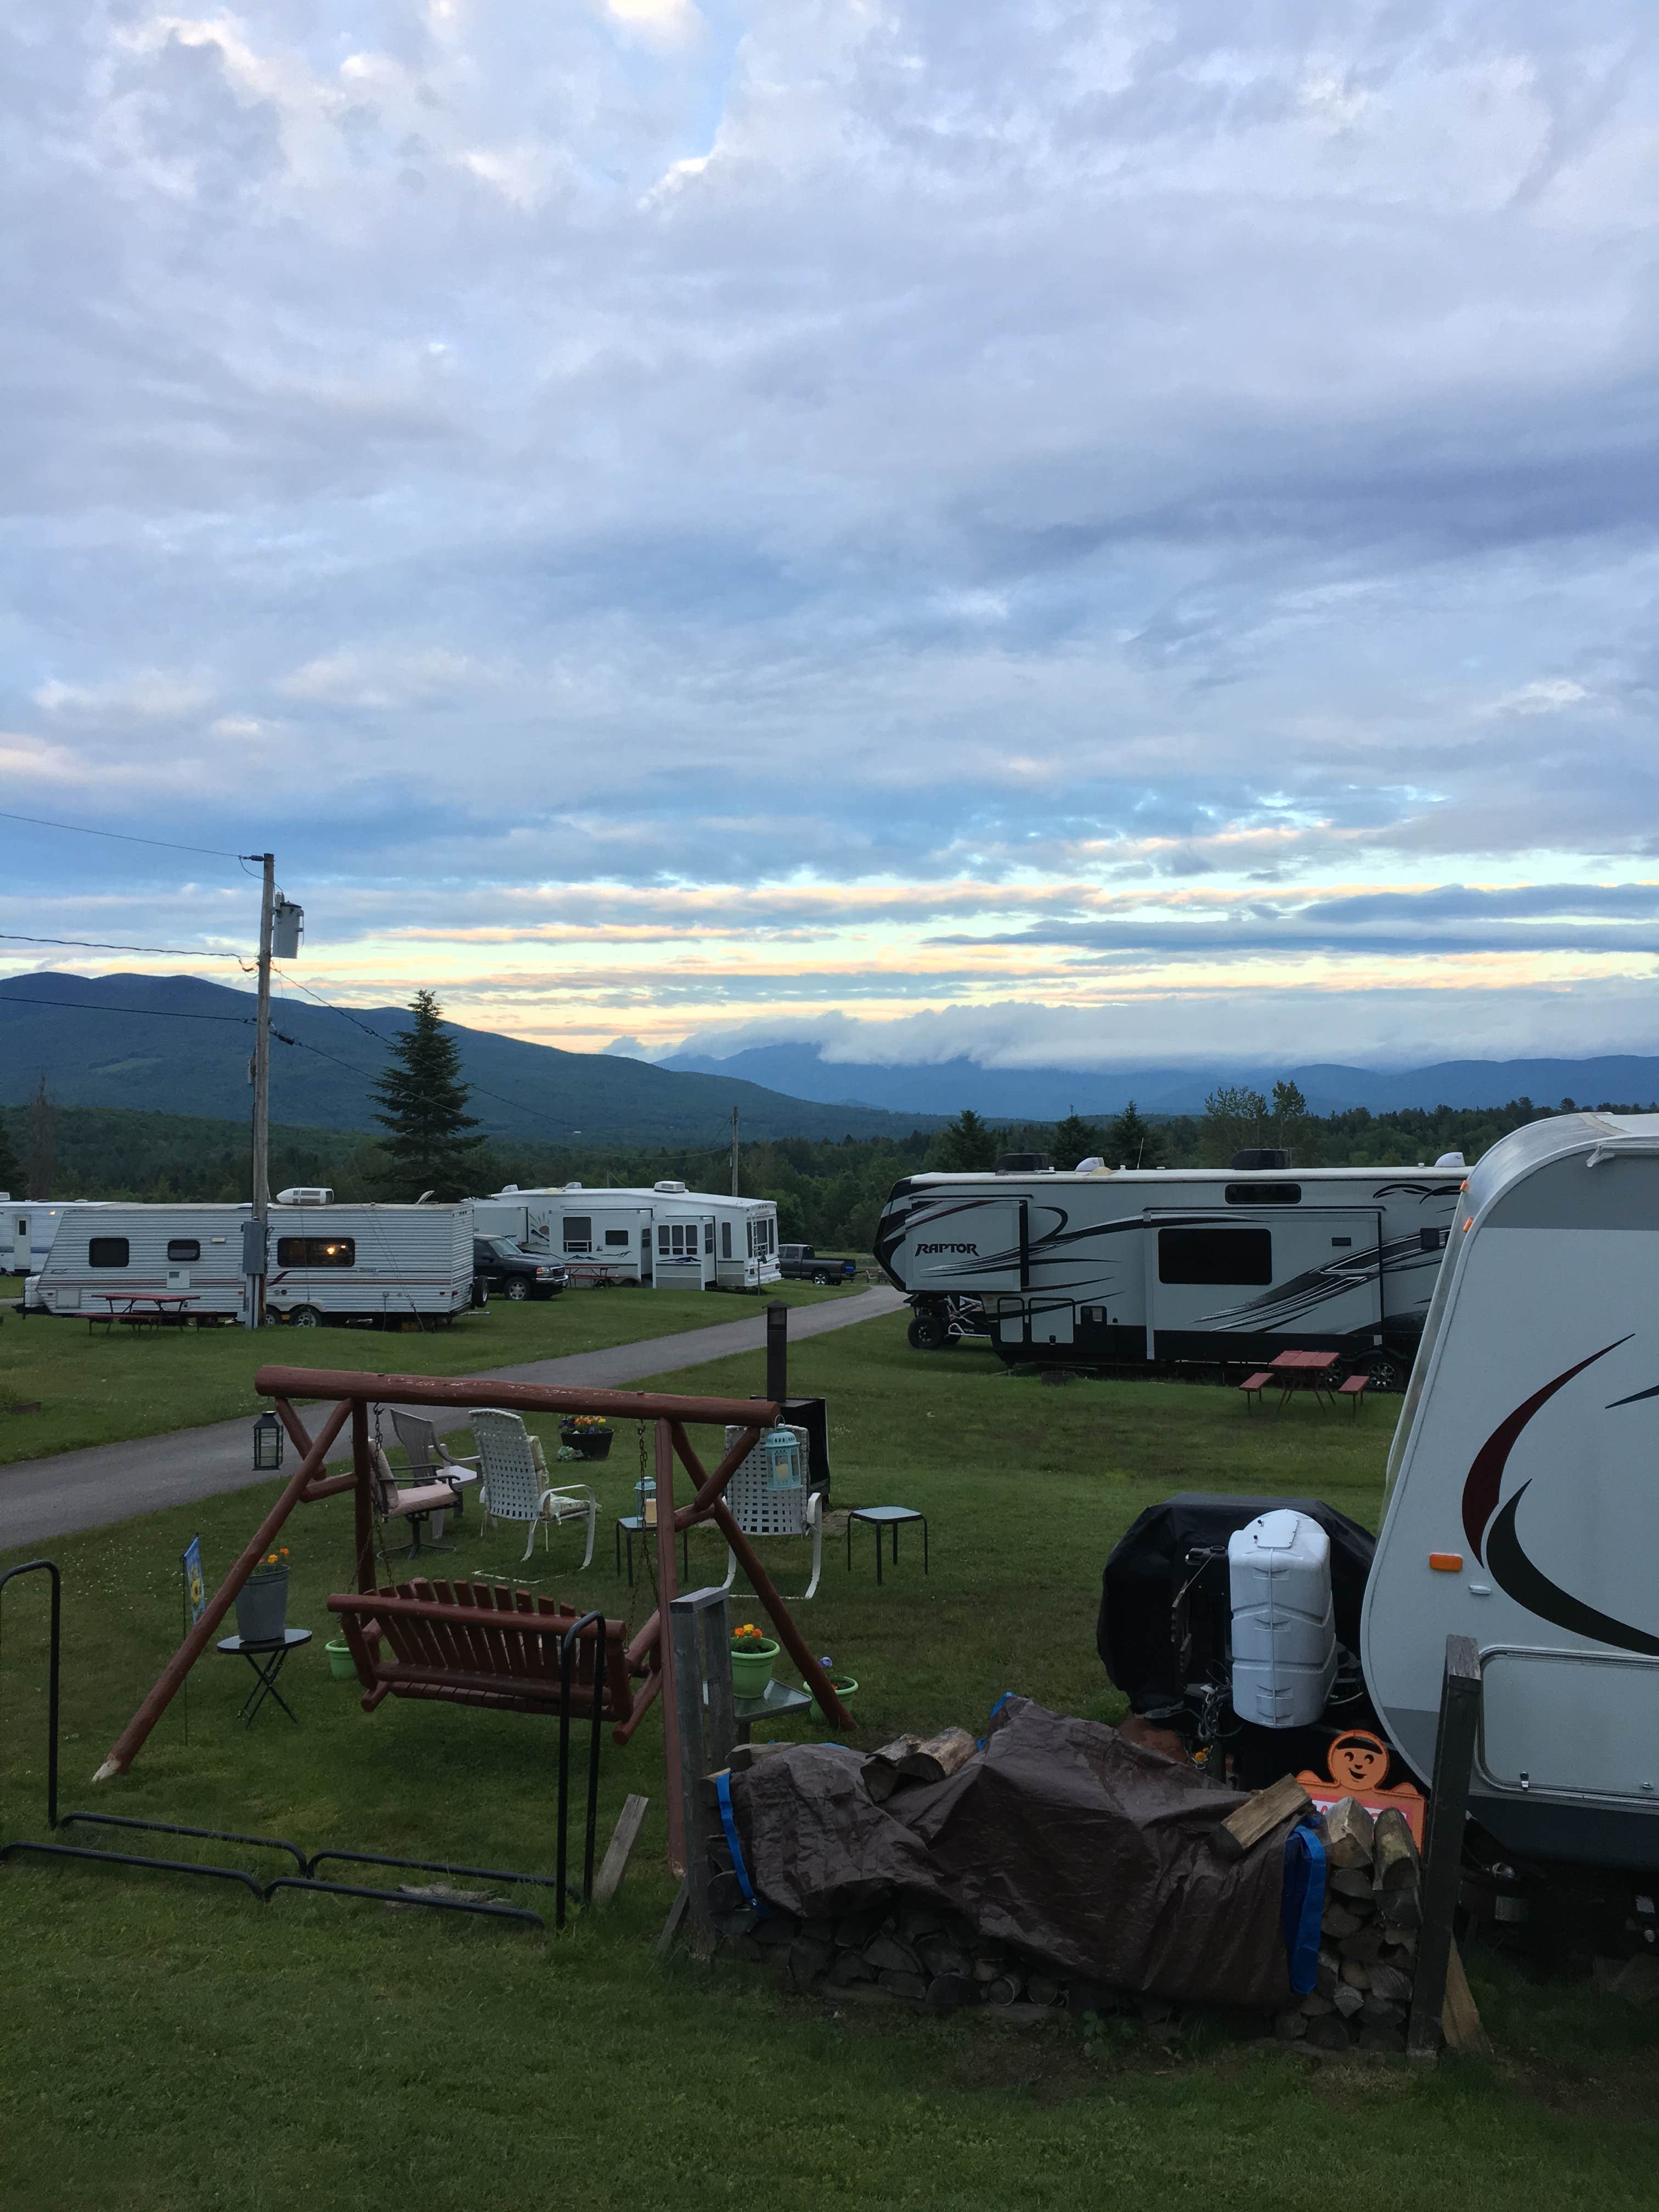 View from “seasonal” side/RV sites